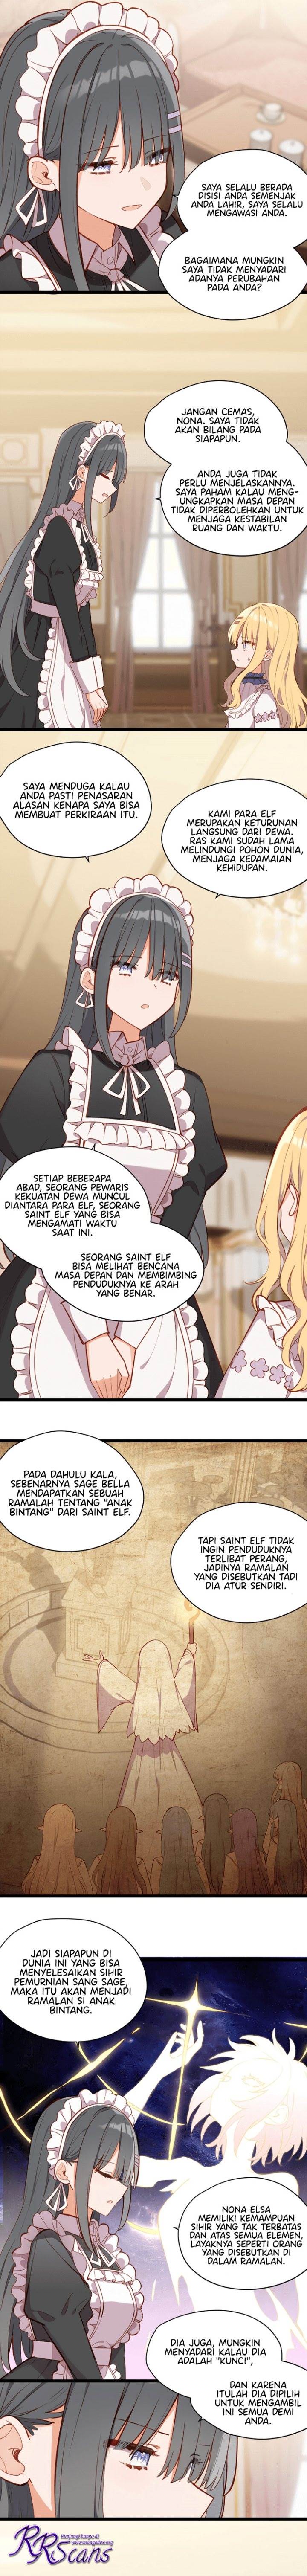 Please Bully Me, Miss Villainess! Chapter 84